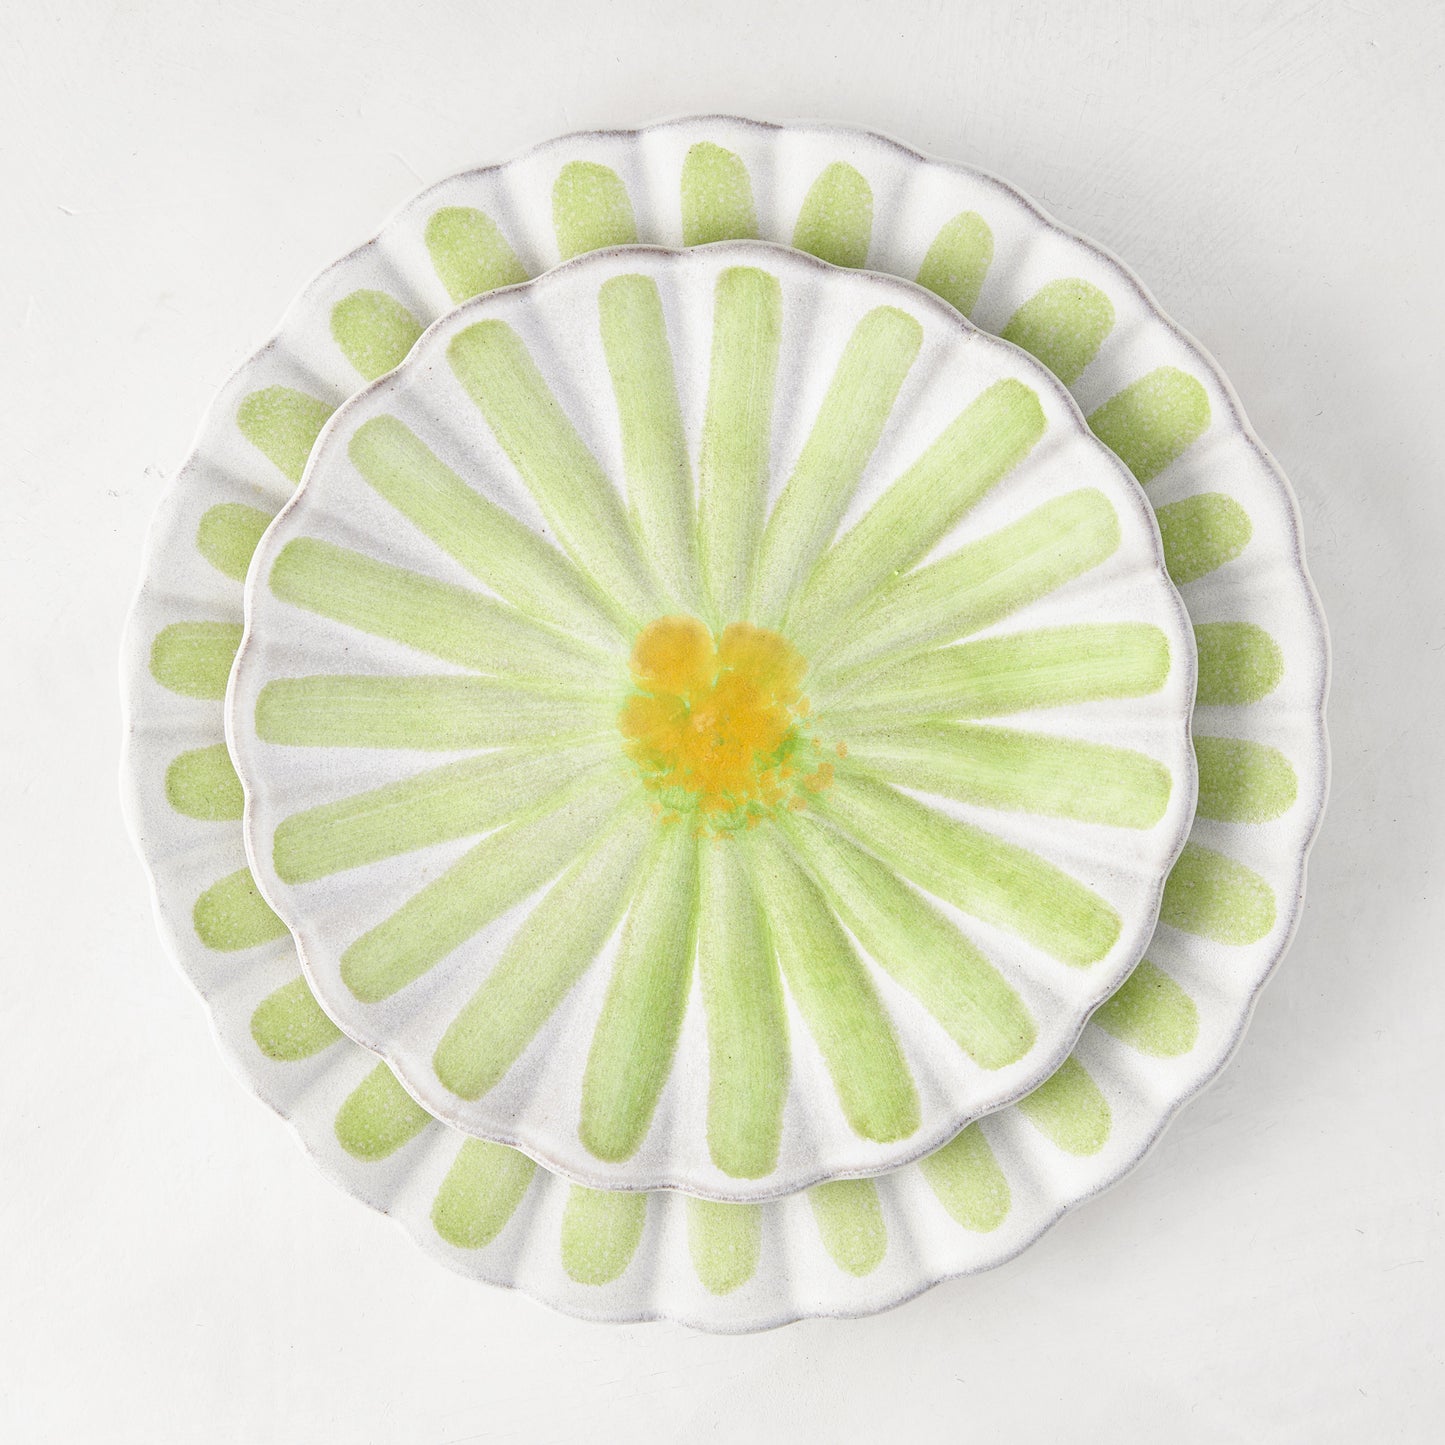 Sunkiss Daisy Painted Stoneware Appetizer Plate